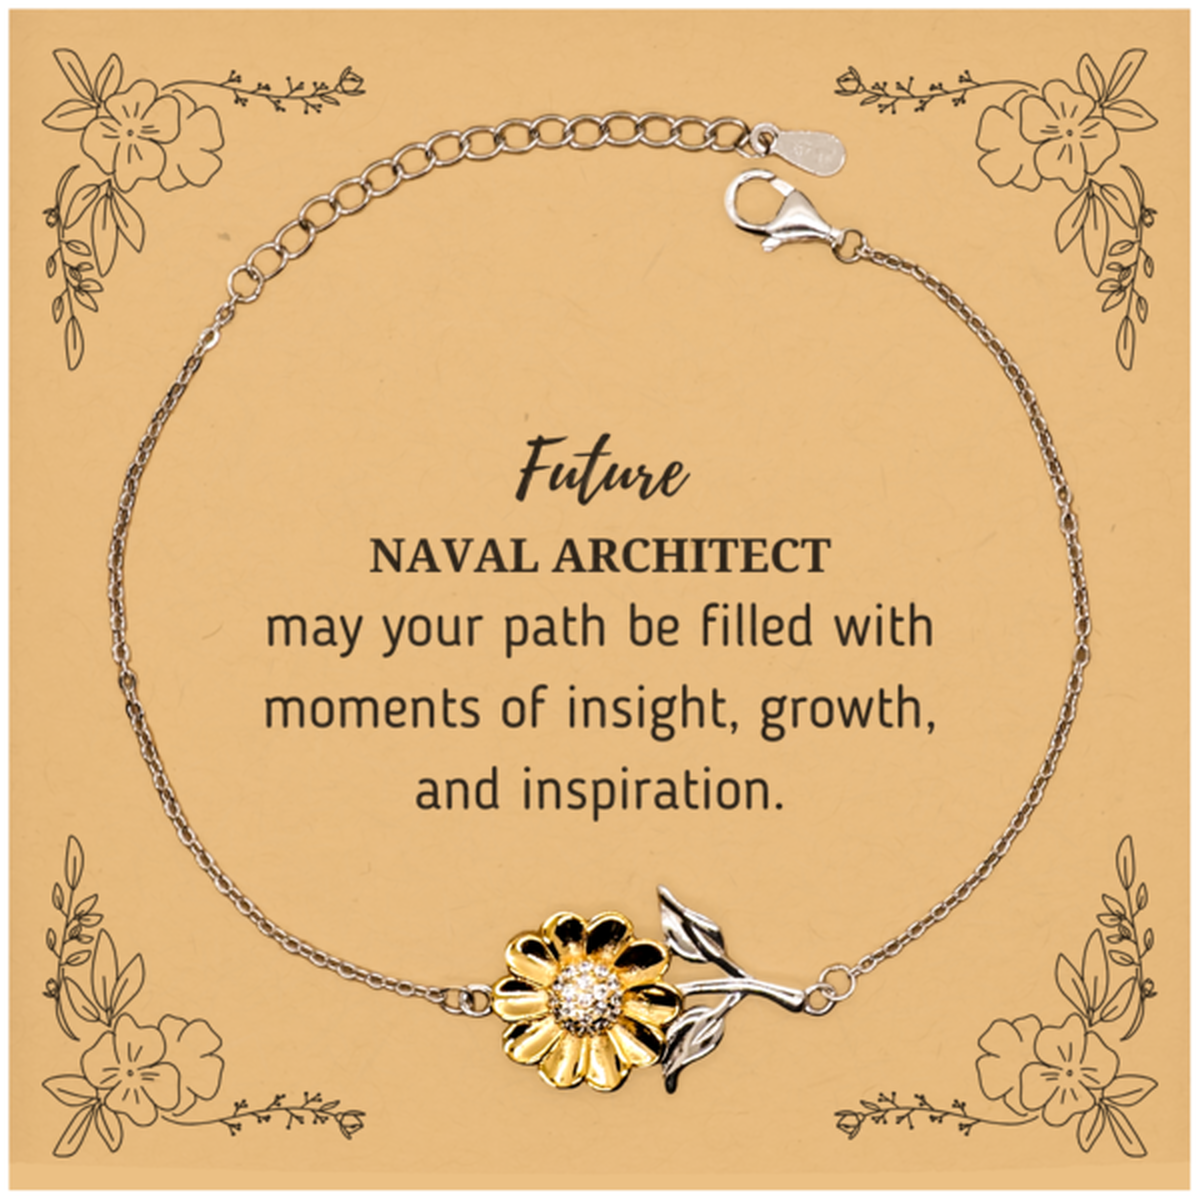 Future Naval Architect Gifts, May your path be filled with moments of insight, Graduation Gifts for New Naval Architect, Christmas Unique Sunflower Bracelet For Men, Women, Friends